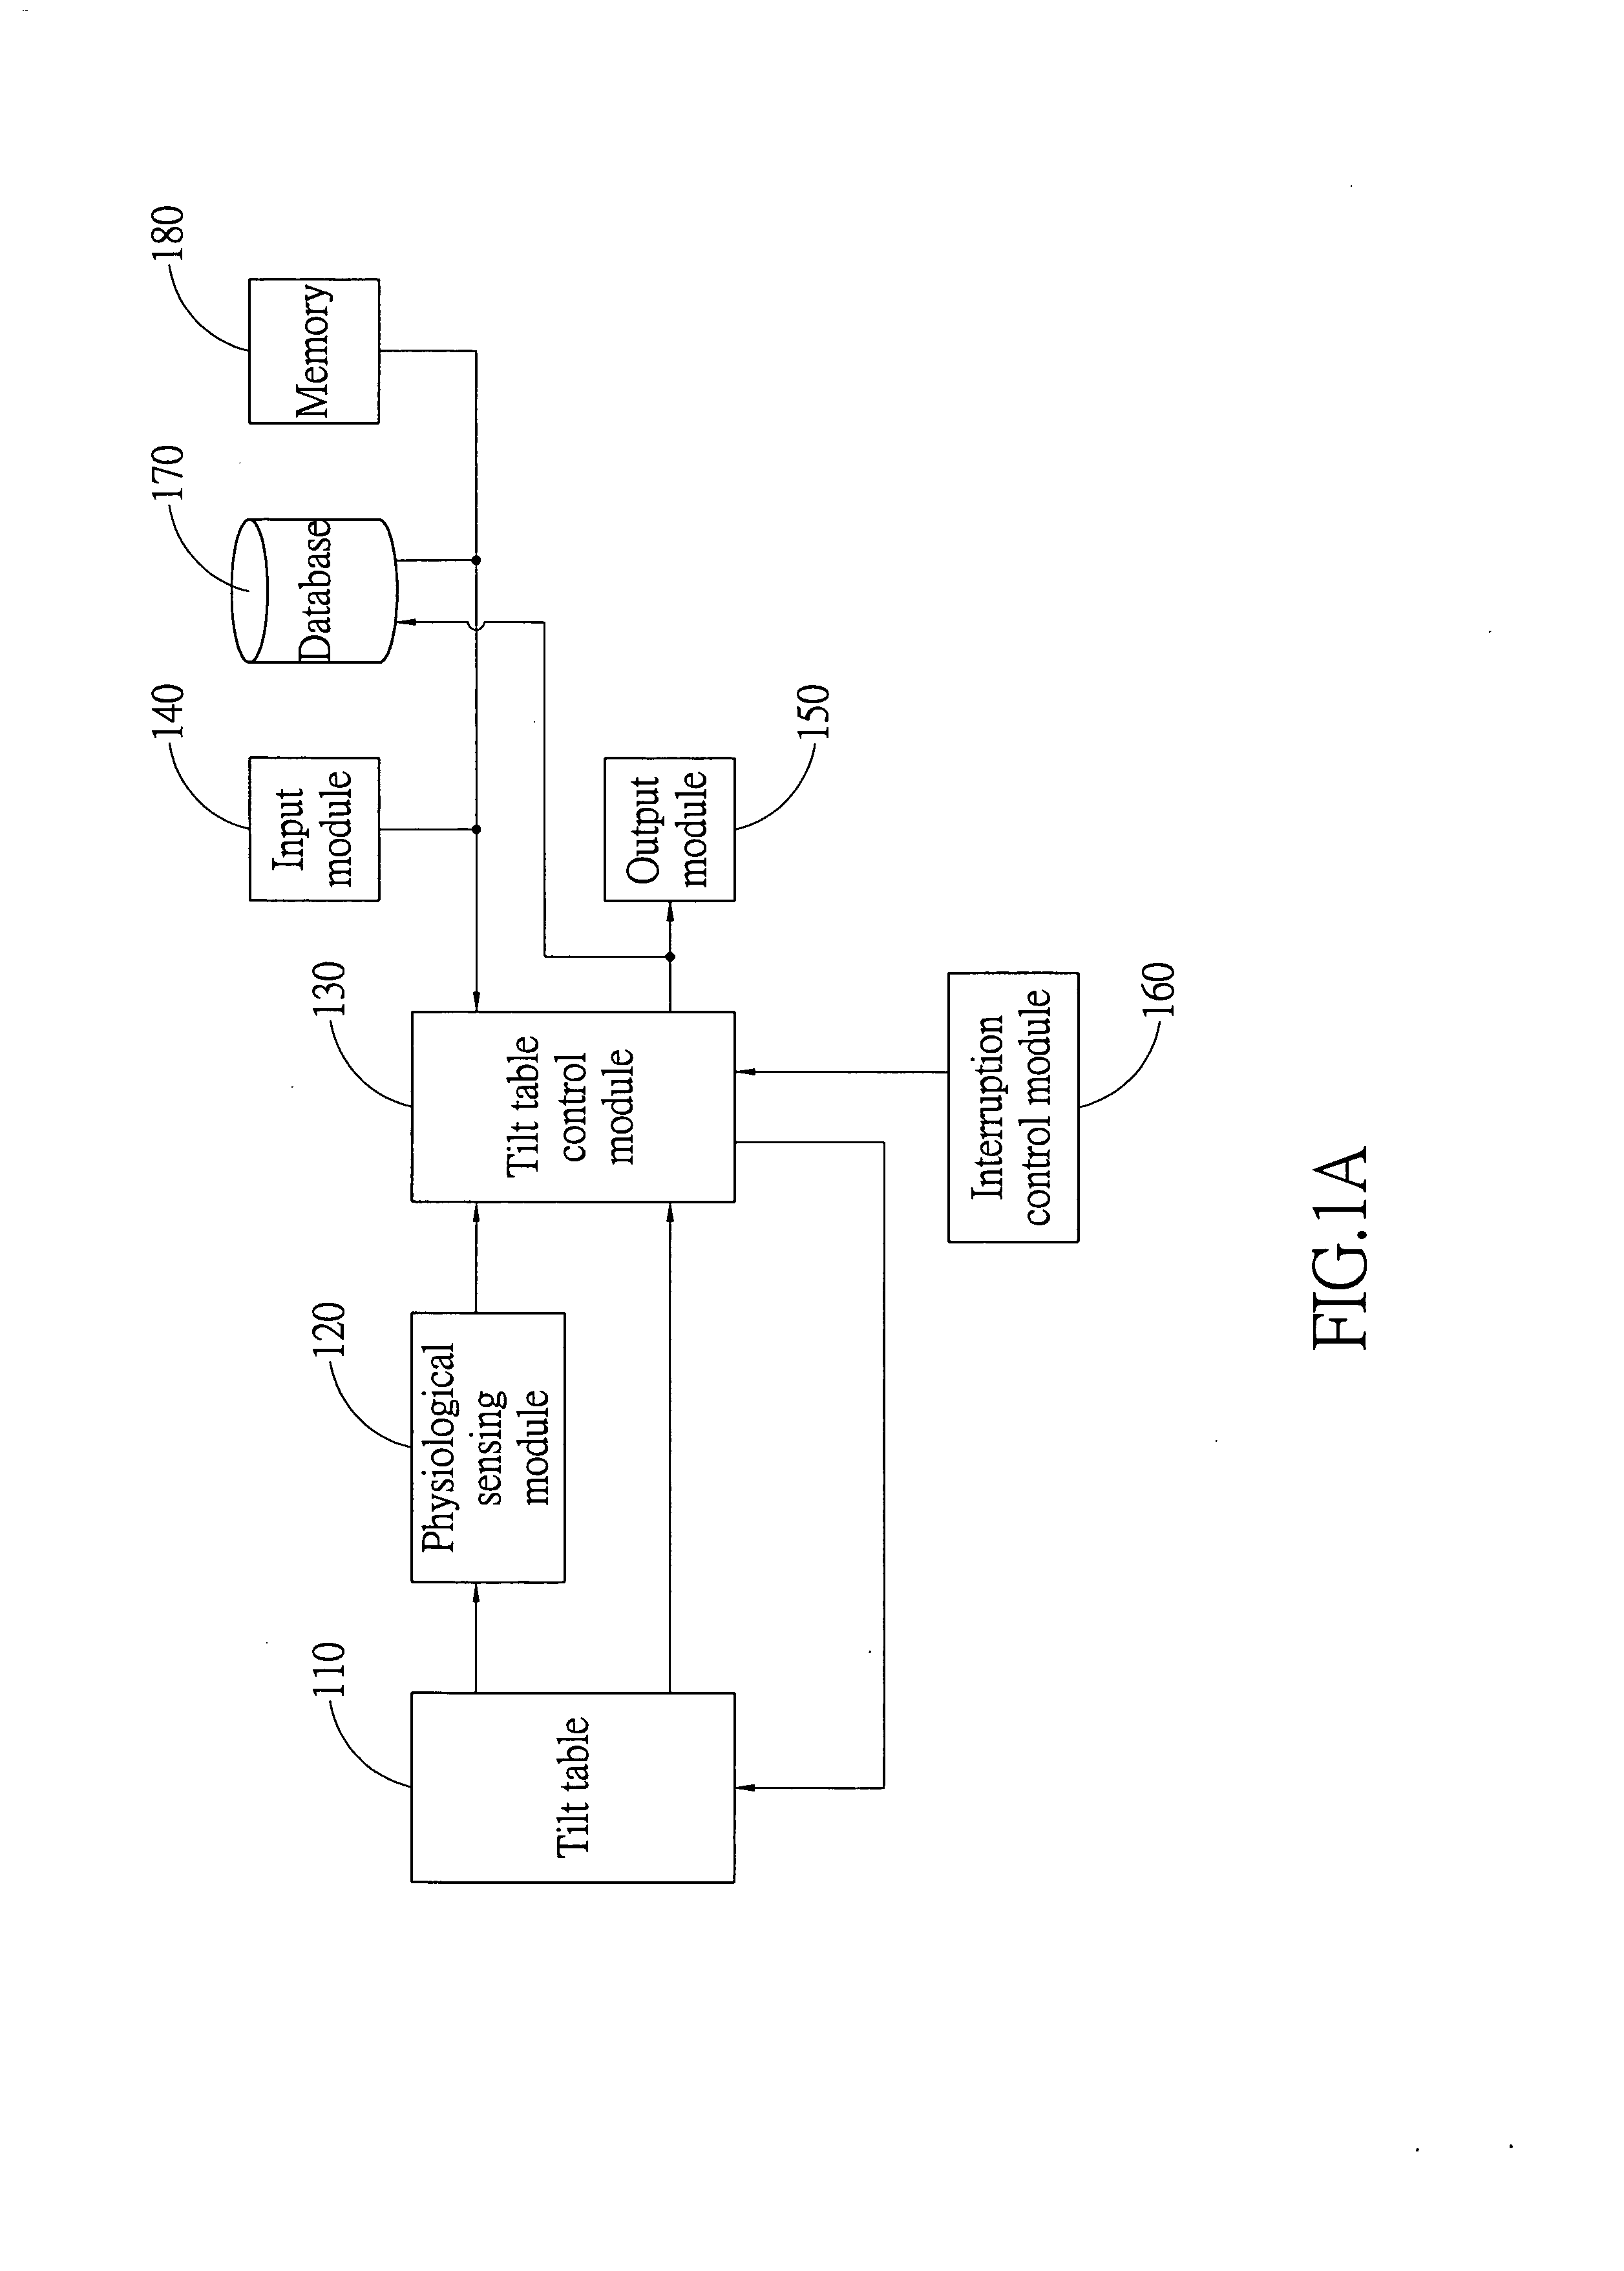 System and method for controlling a tilt table